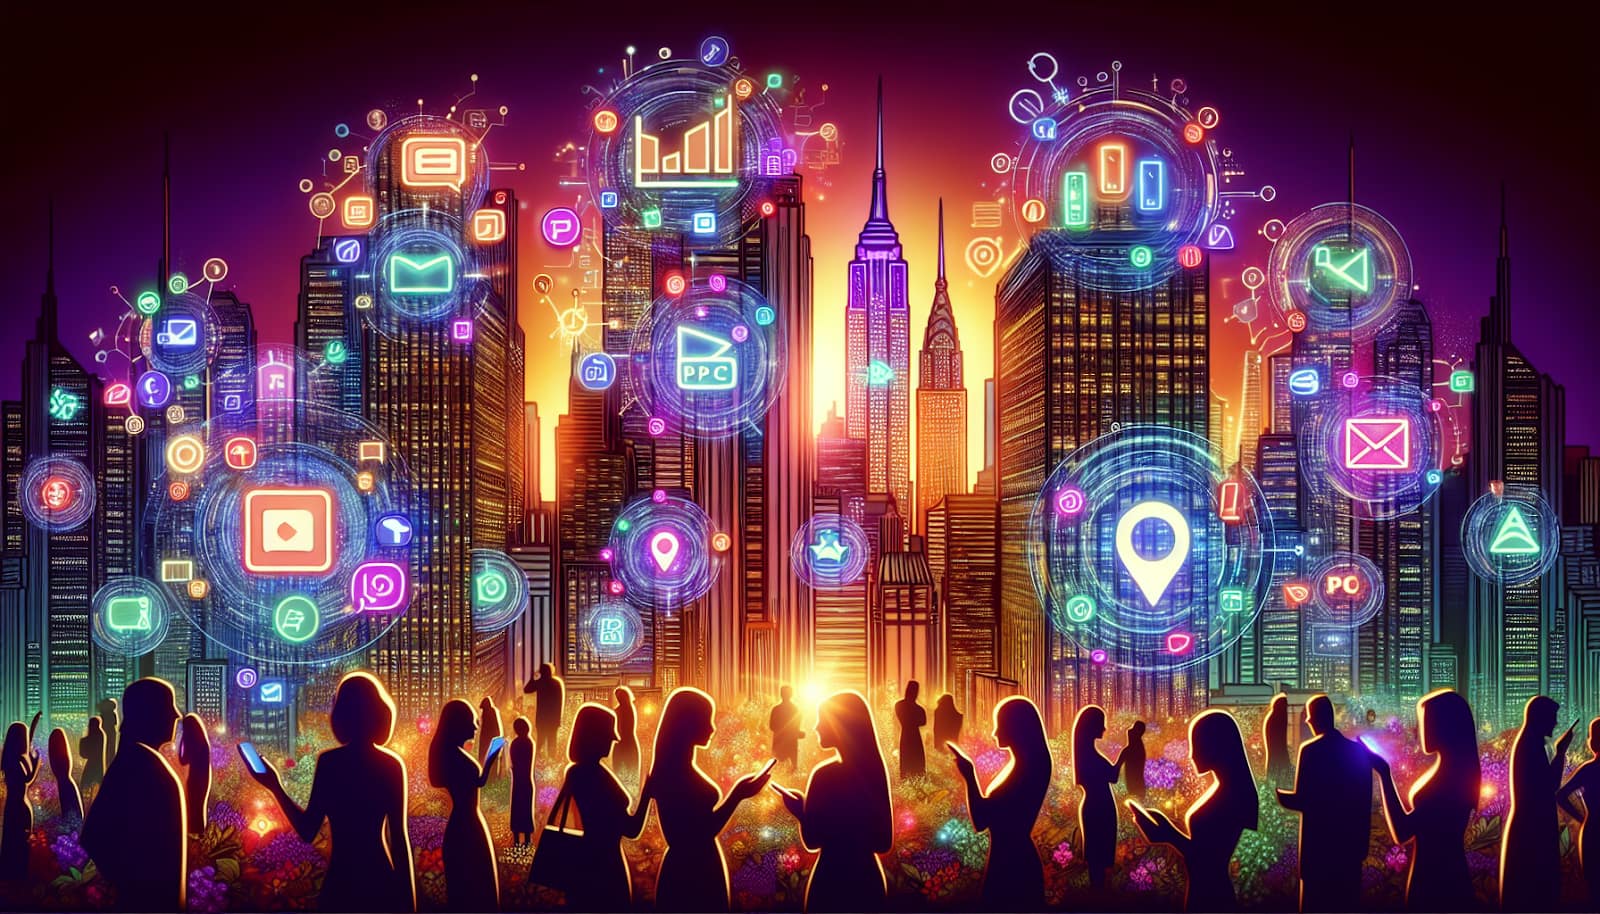 Illustration of New York City skyline with online advertising icons